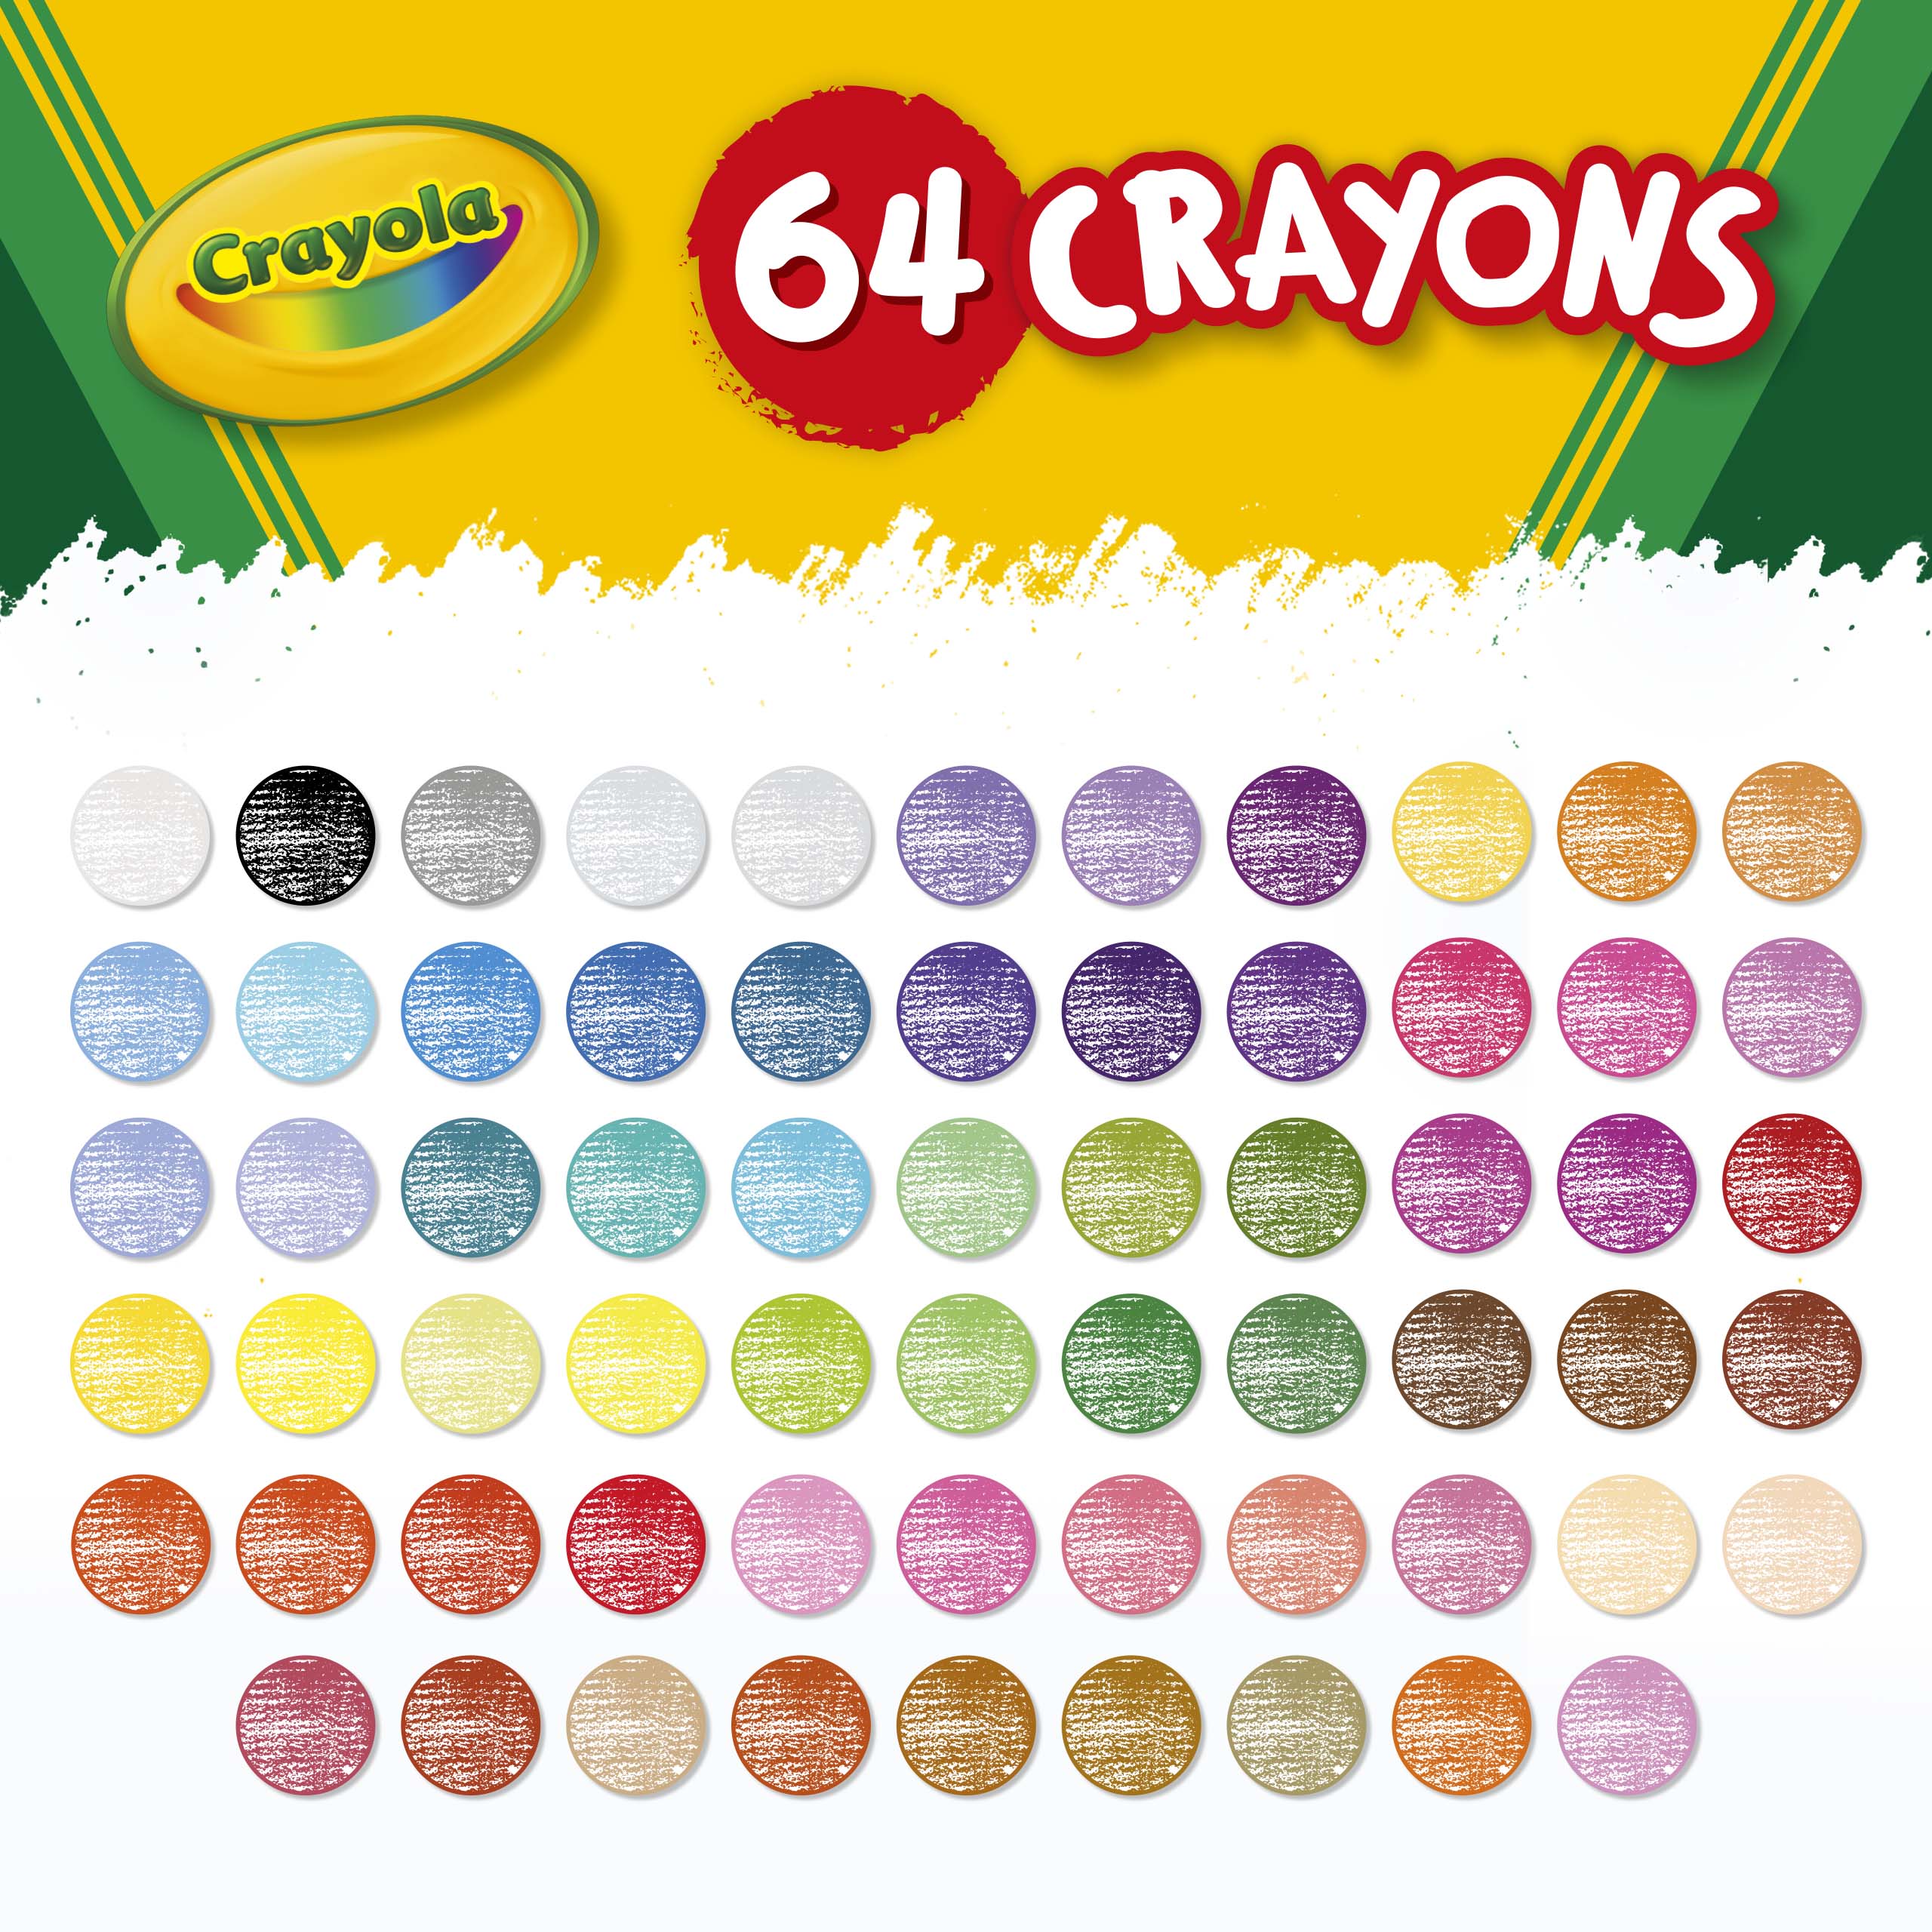 Crayola Crayons, 64 Ct, Back to School Supplies for Kids, Teacher Supplies, Gift - image 8 of 10